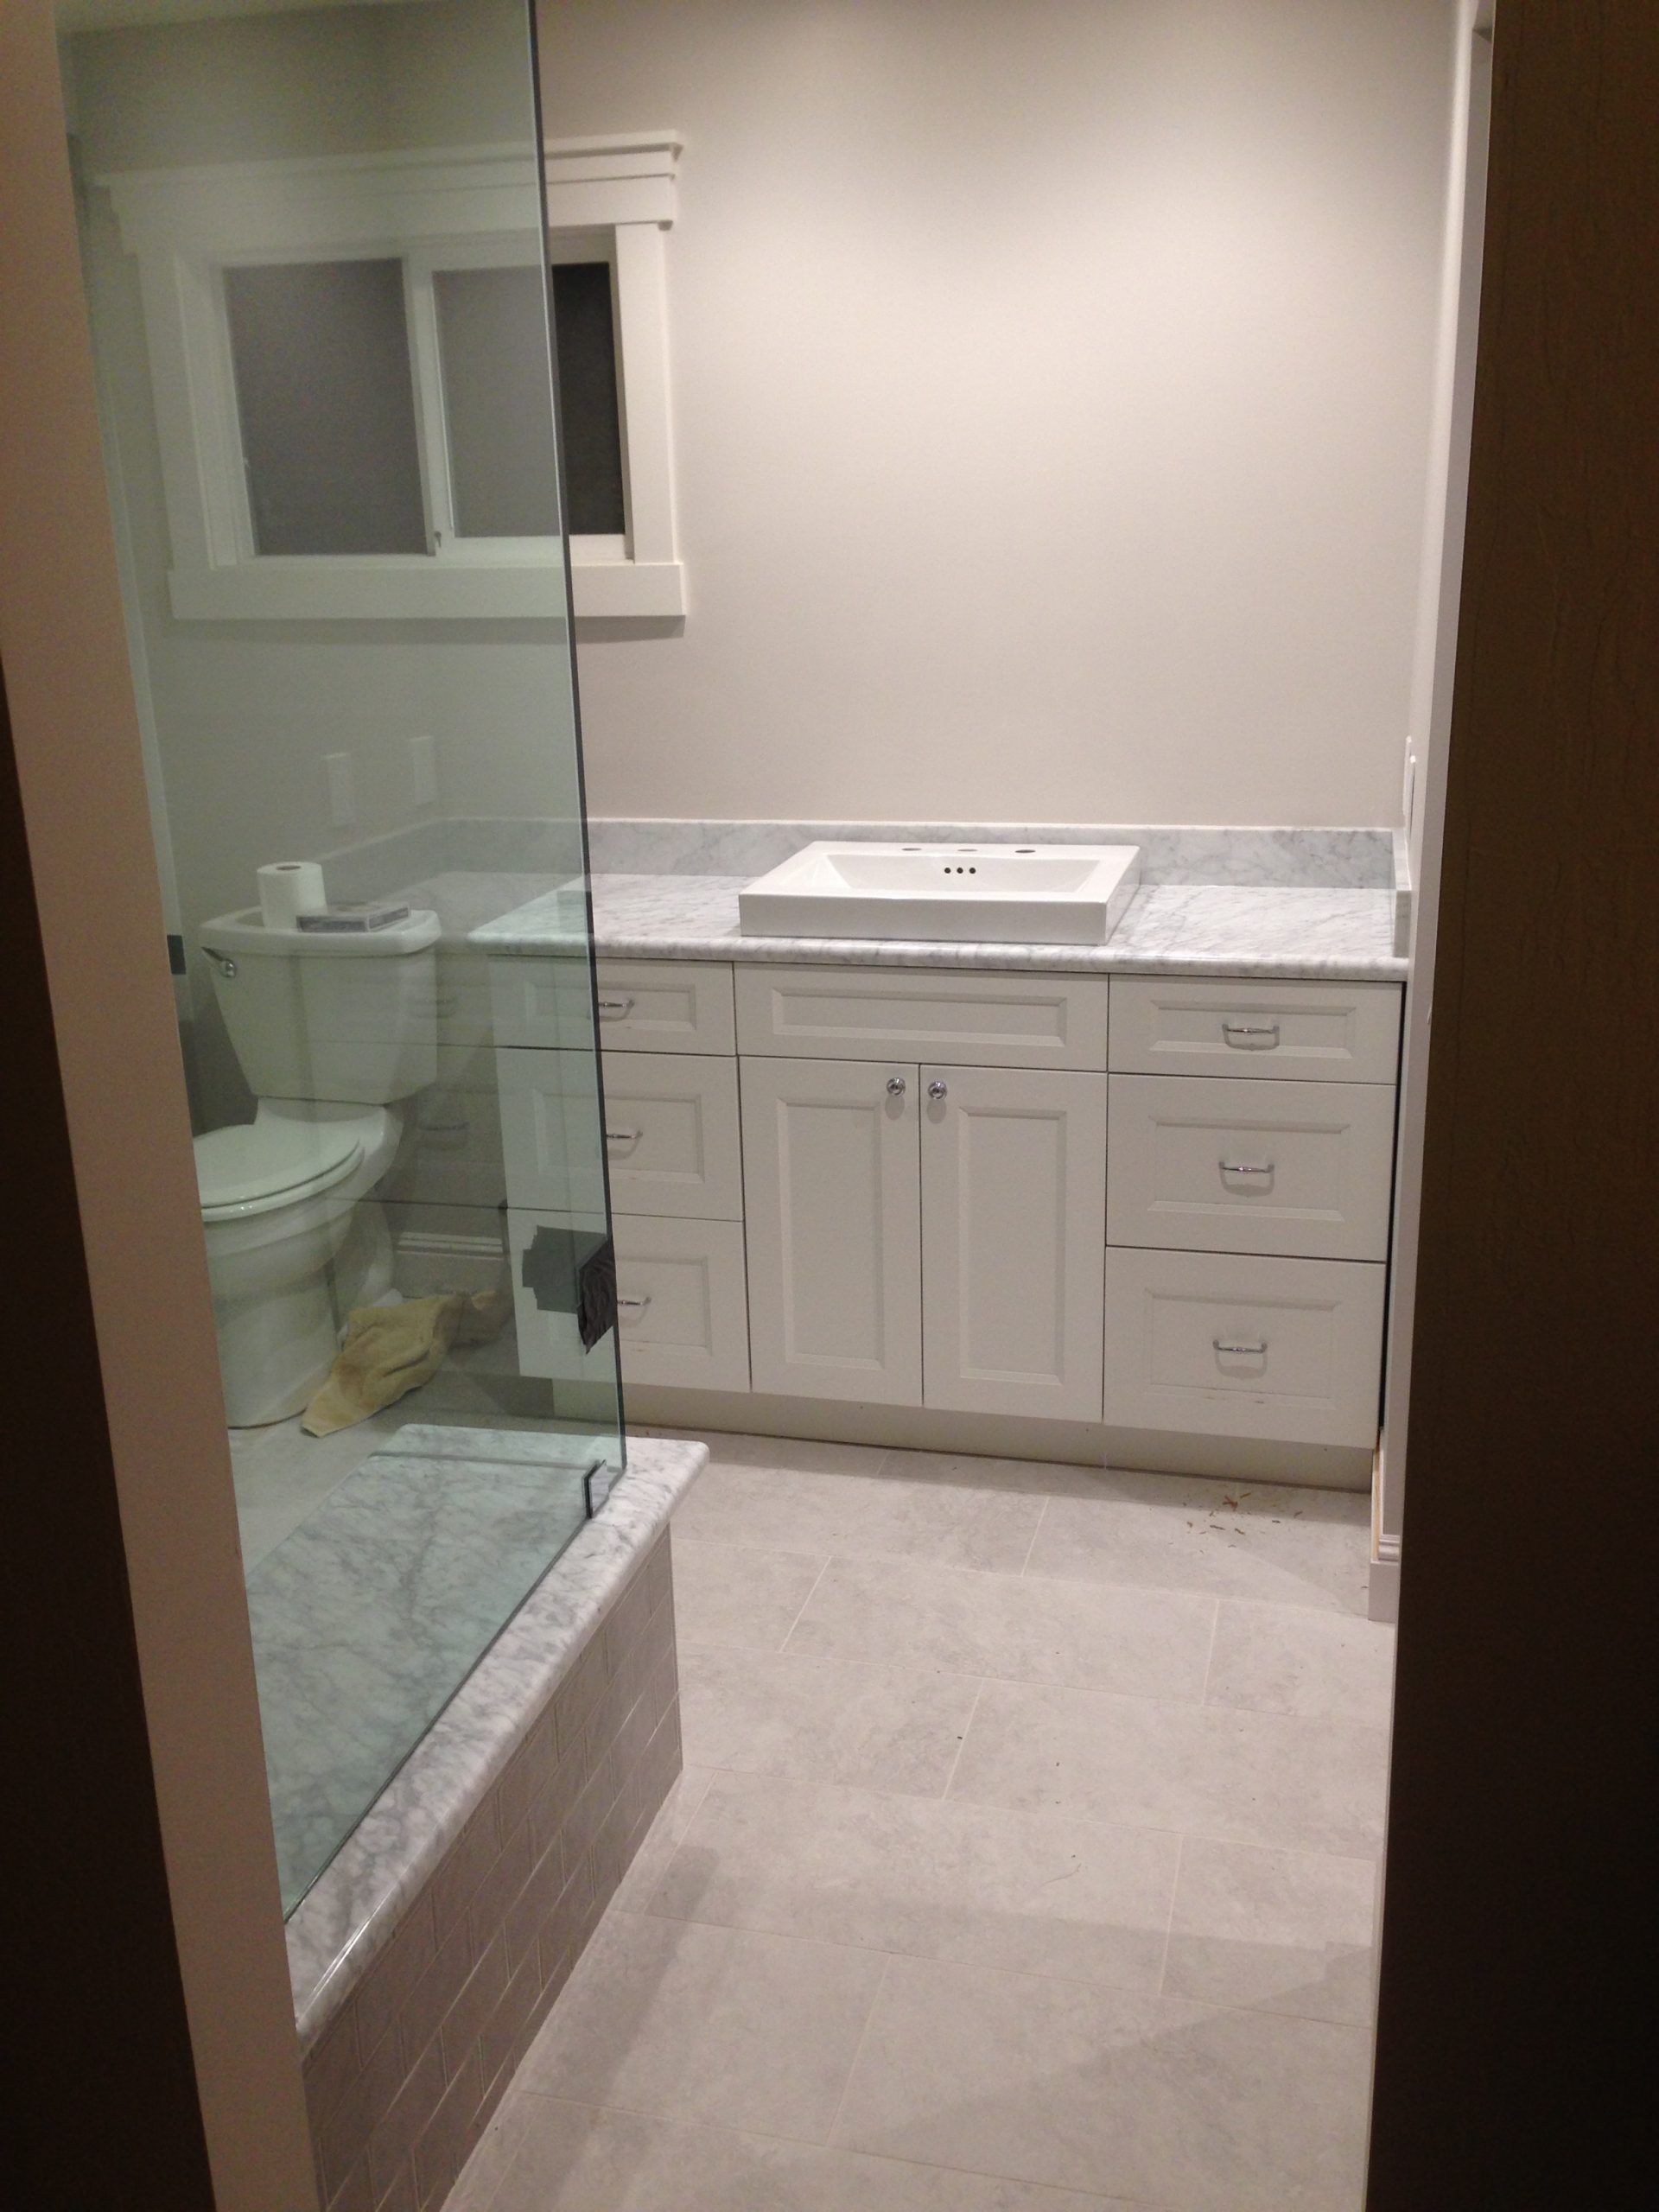 Master Bathroom gets a major remodel with removed walls and new walk-in closet